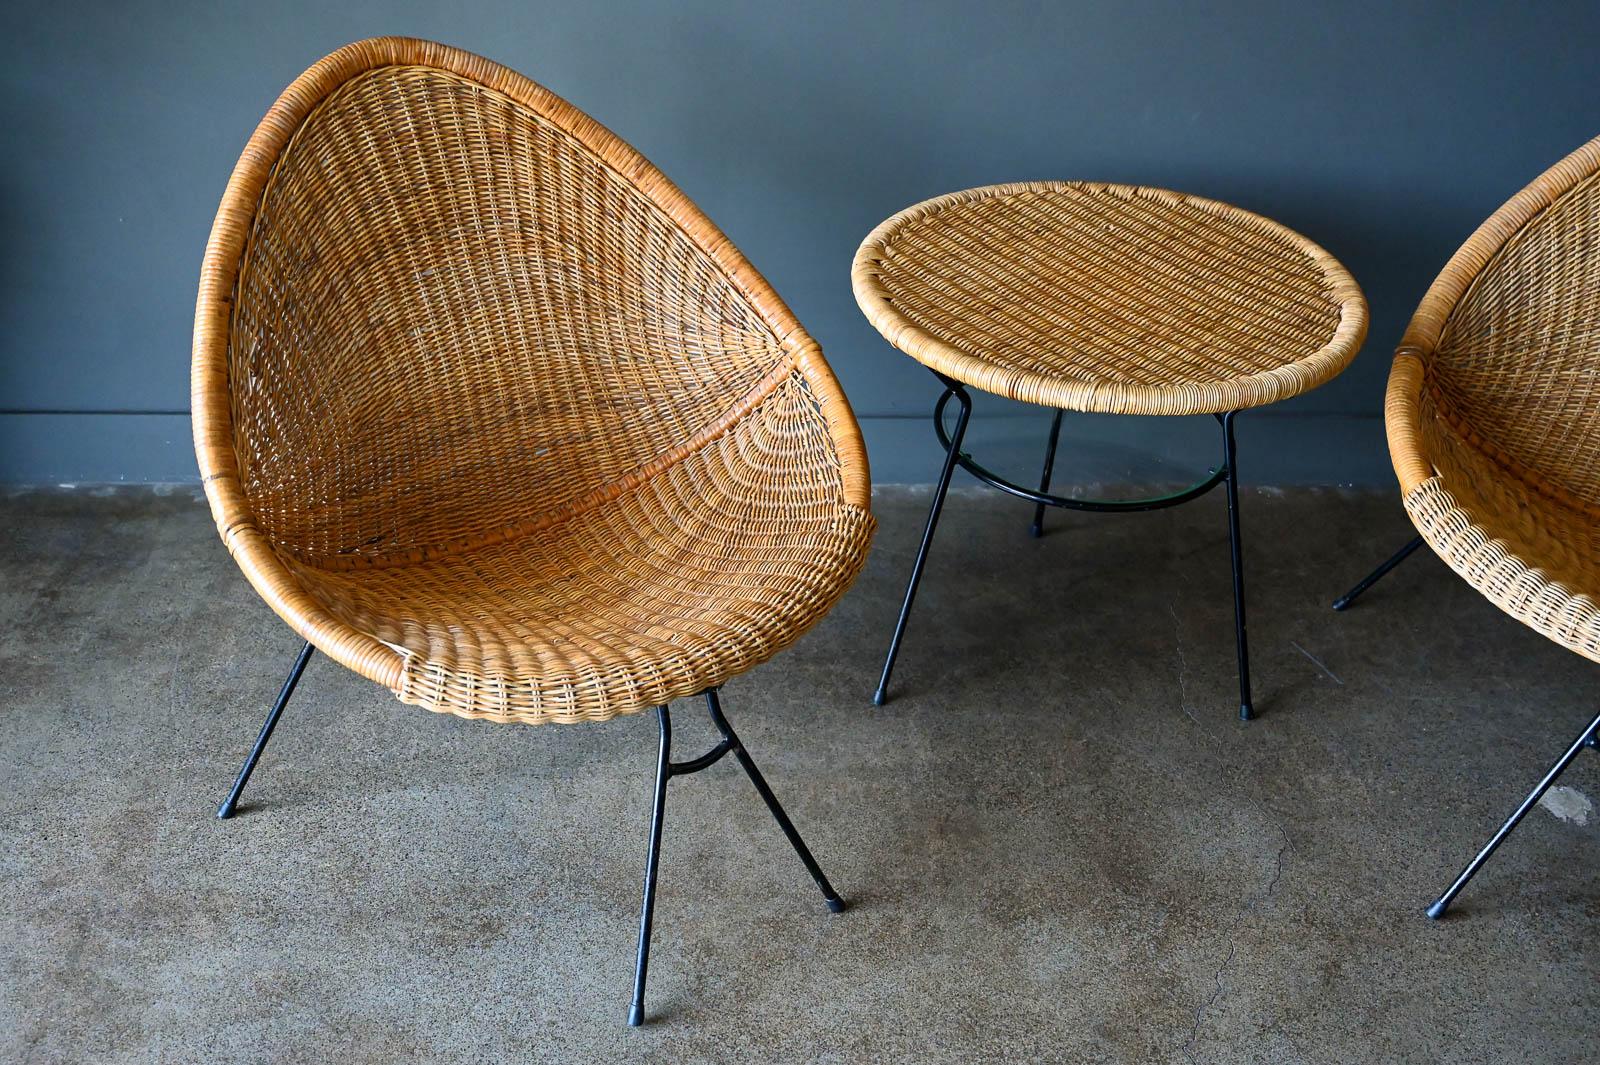 Vintage Italian Rattan and Iron Scoop Chairs and Table, ca. 1950 For Sale 1